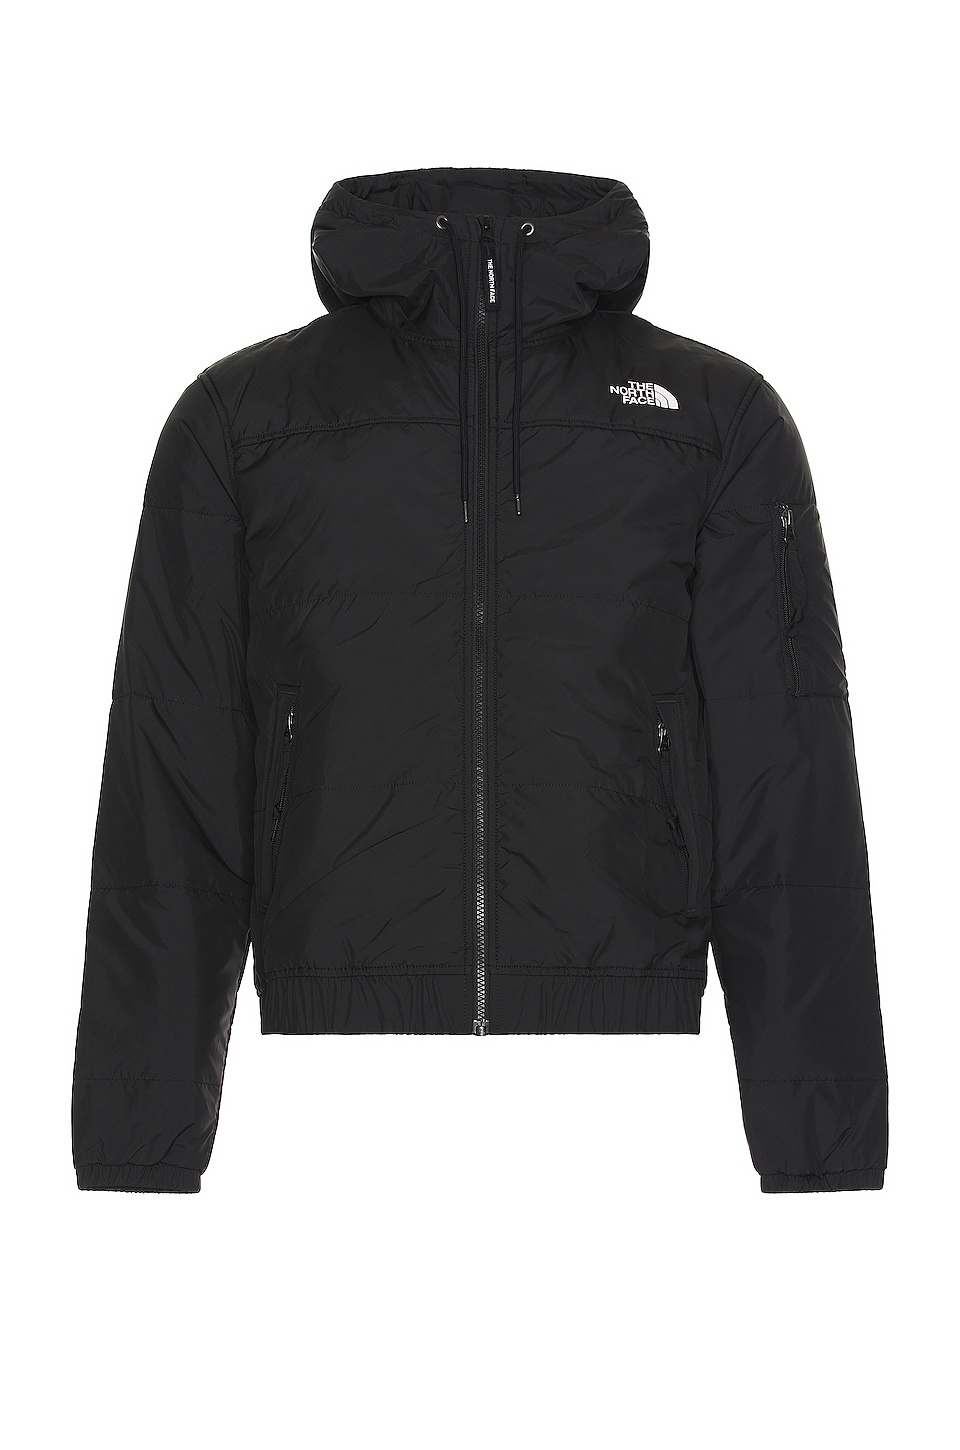 The North Face Highrail Bomber Jacket in TNF Black | REVOLVE